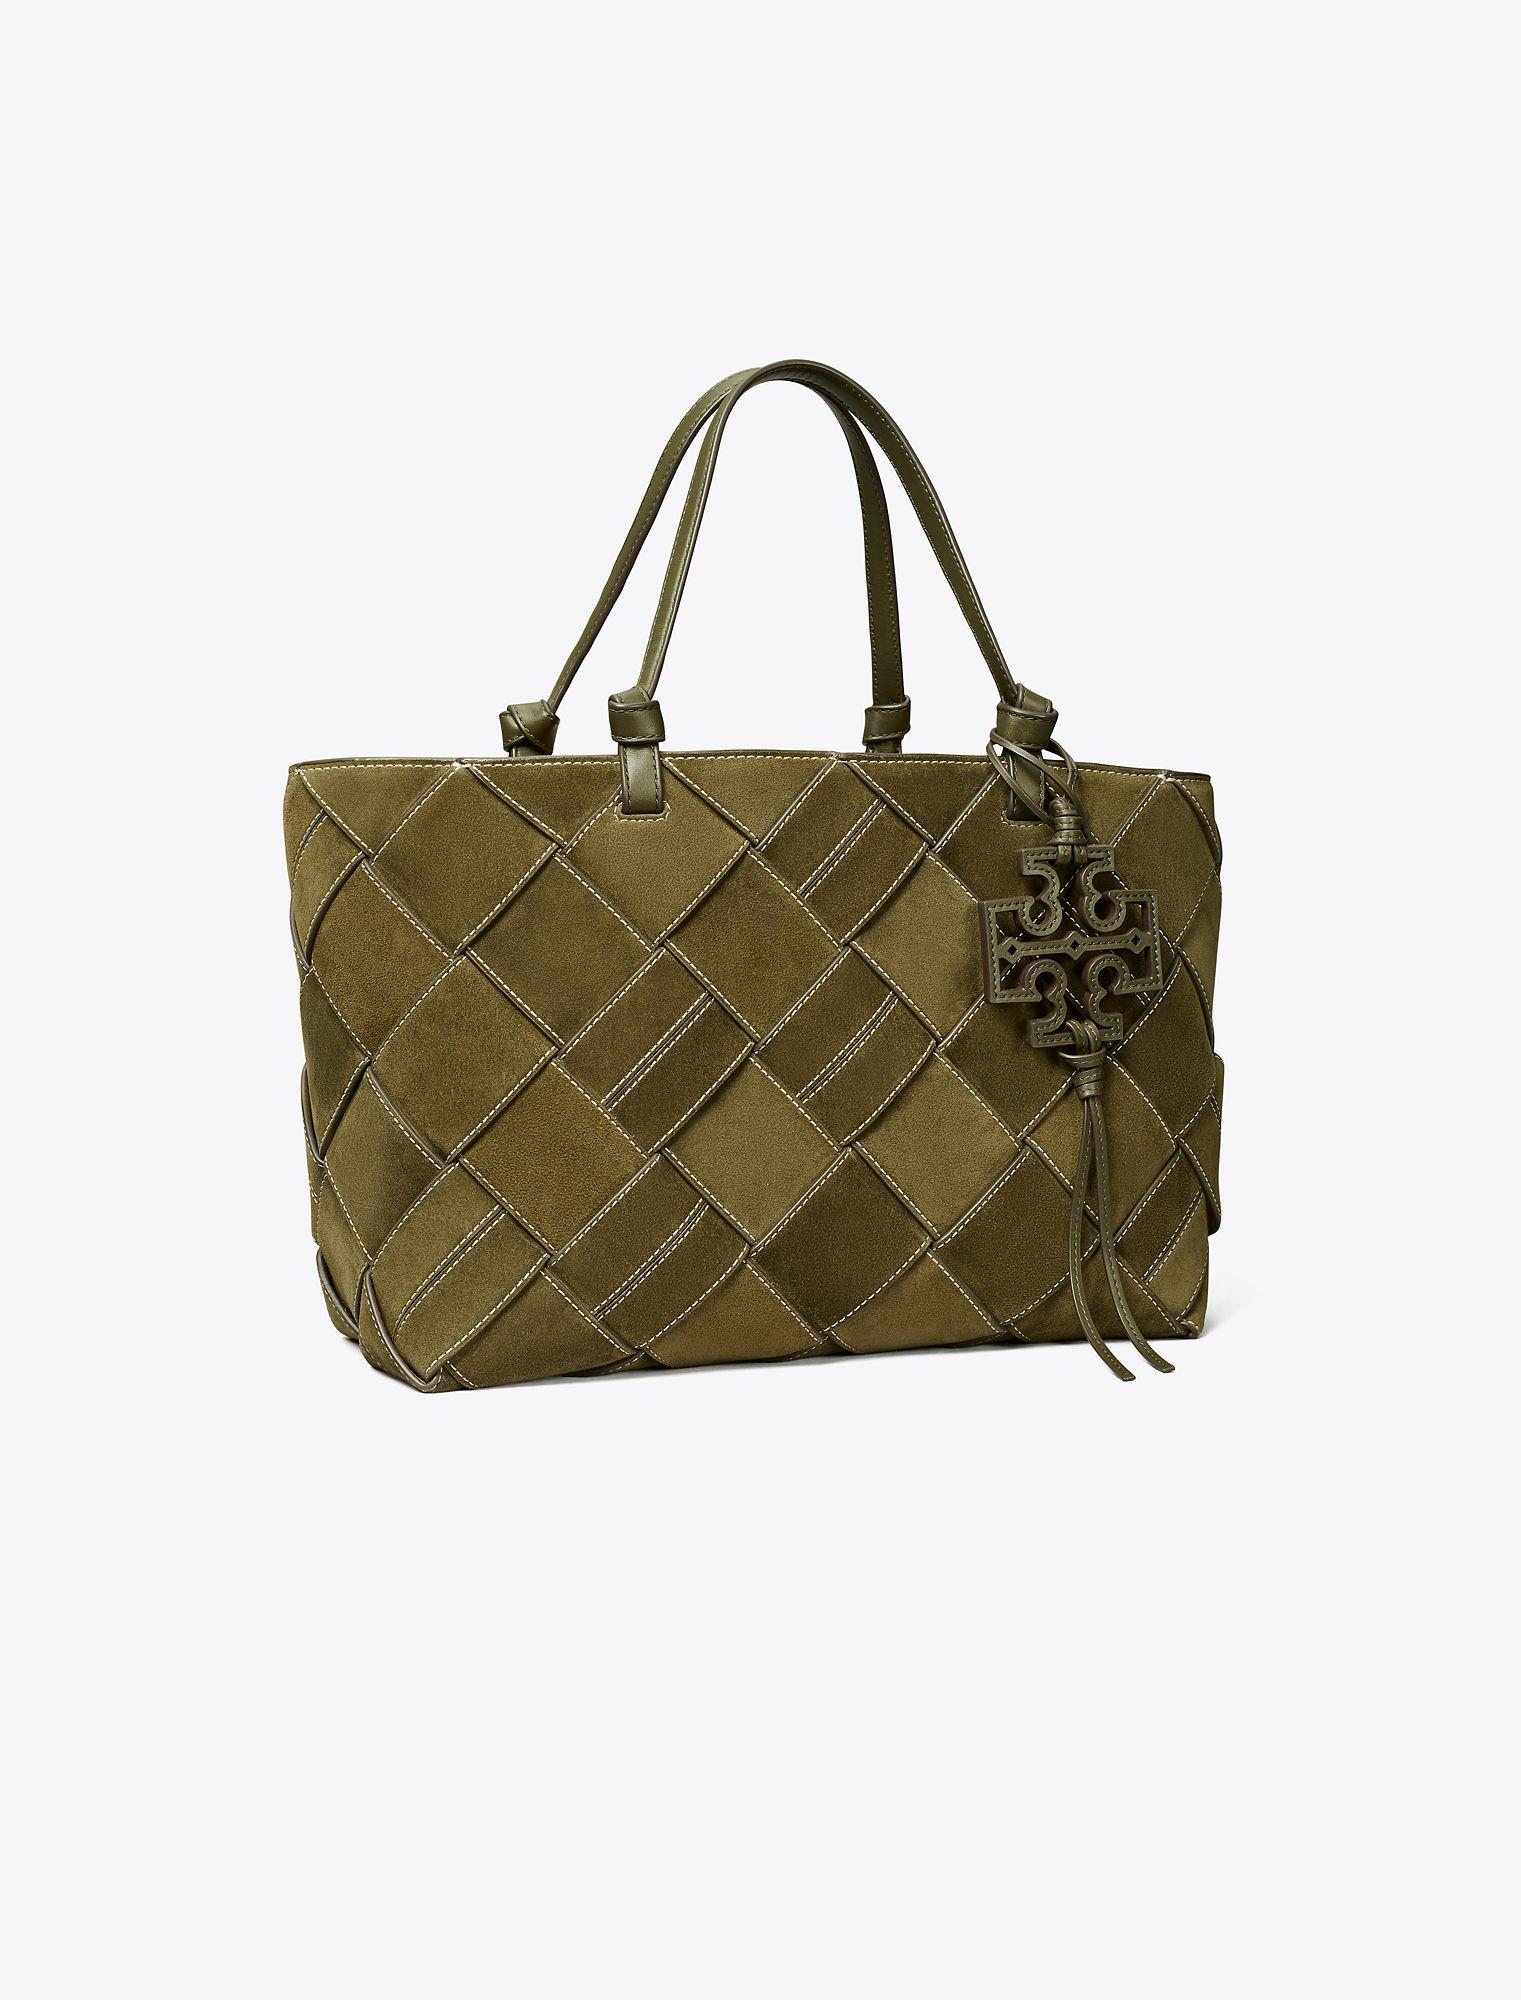 Tory Burch Perry Large Suede Tote Bag - Farfetch